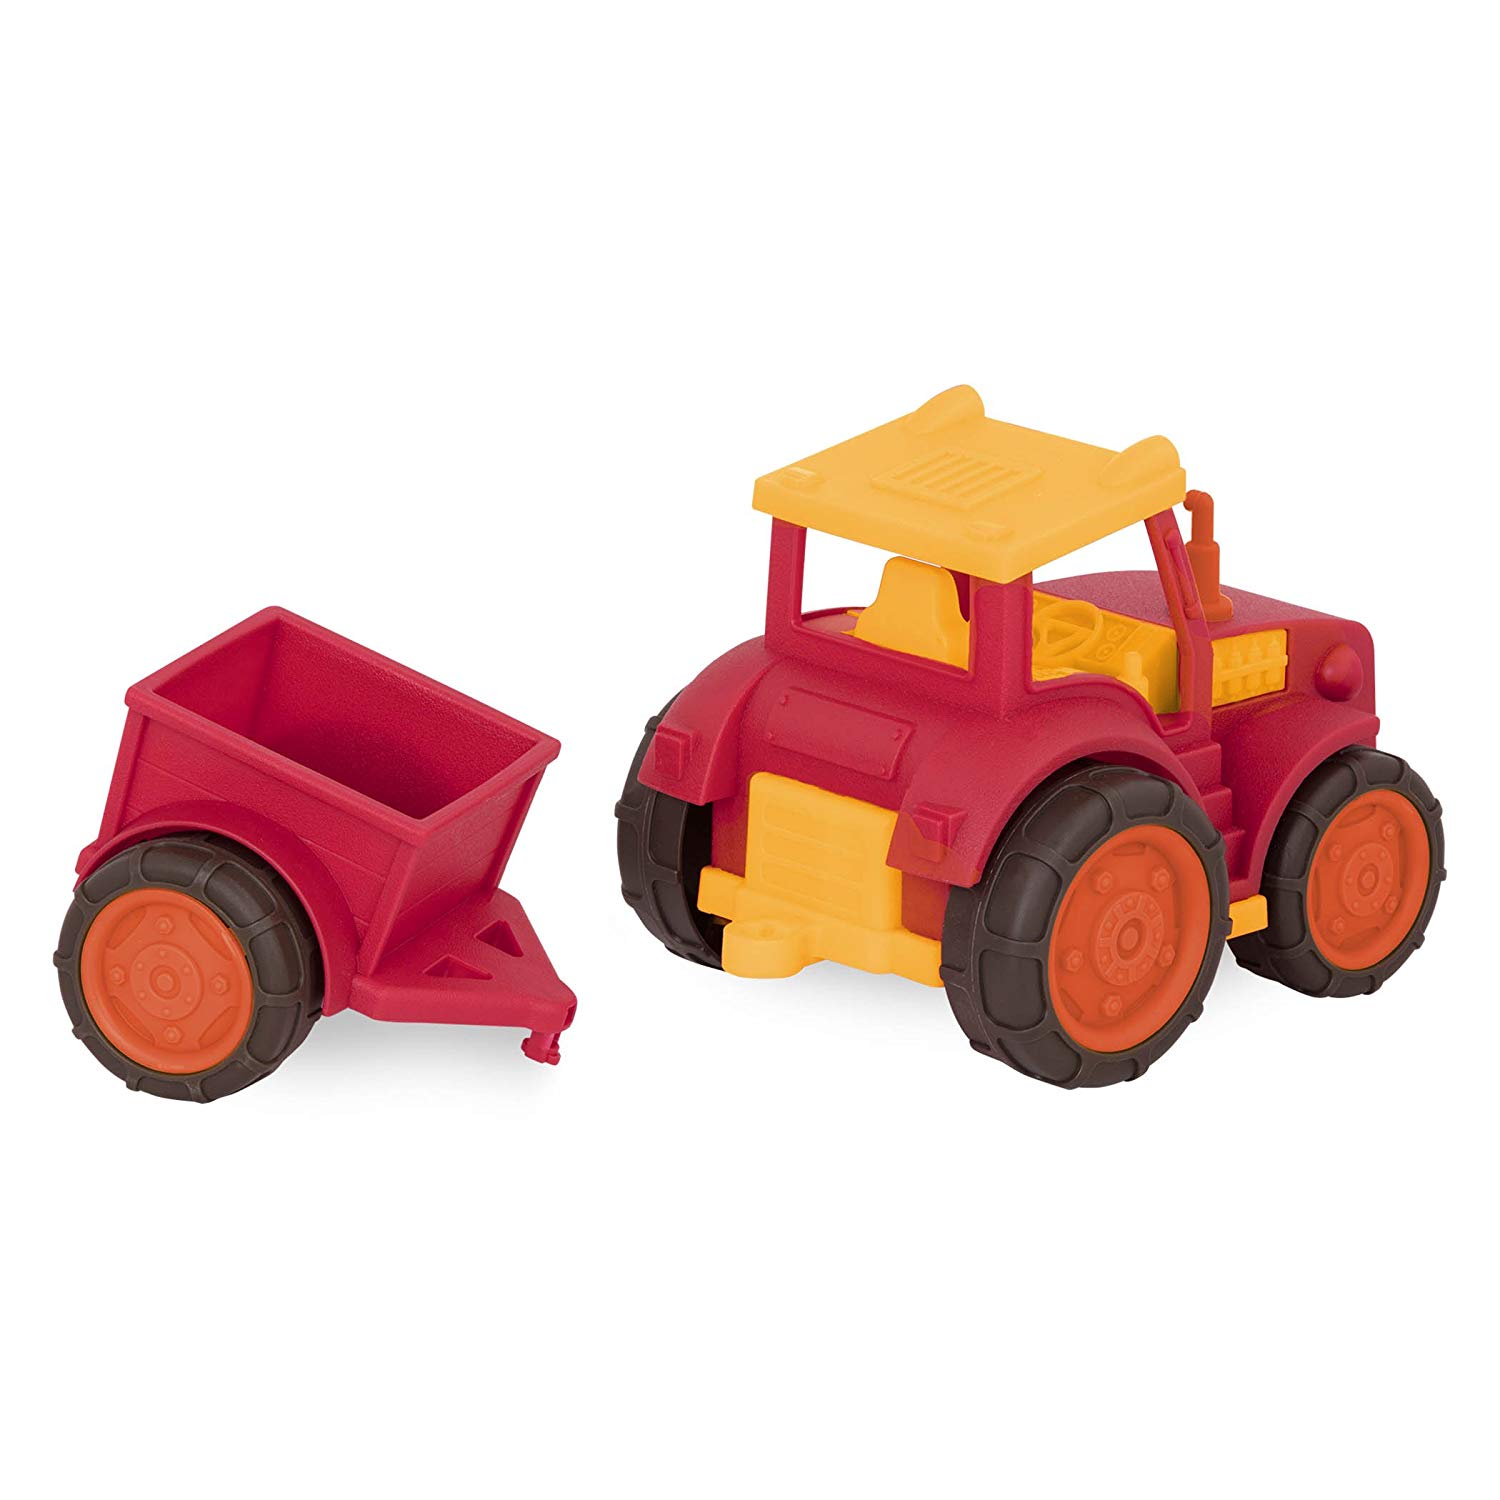 Wonder Wheels By Battat Tractor & Trailer Toy Combo For Toddlers Age 1 Up 2